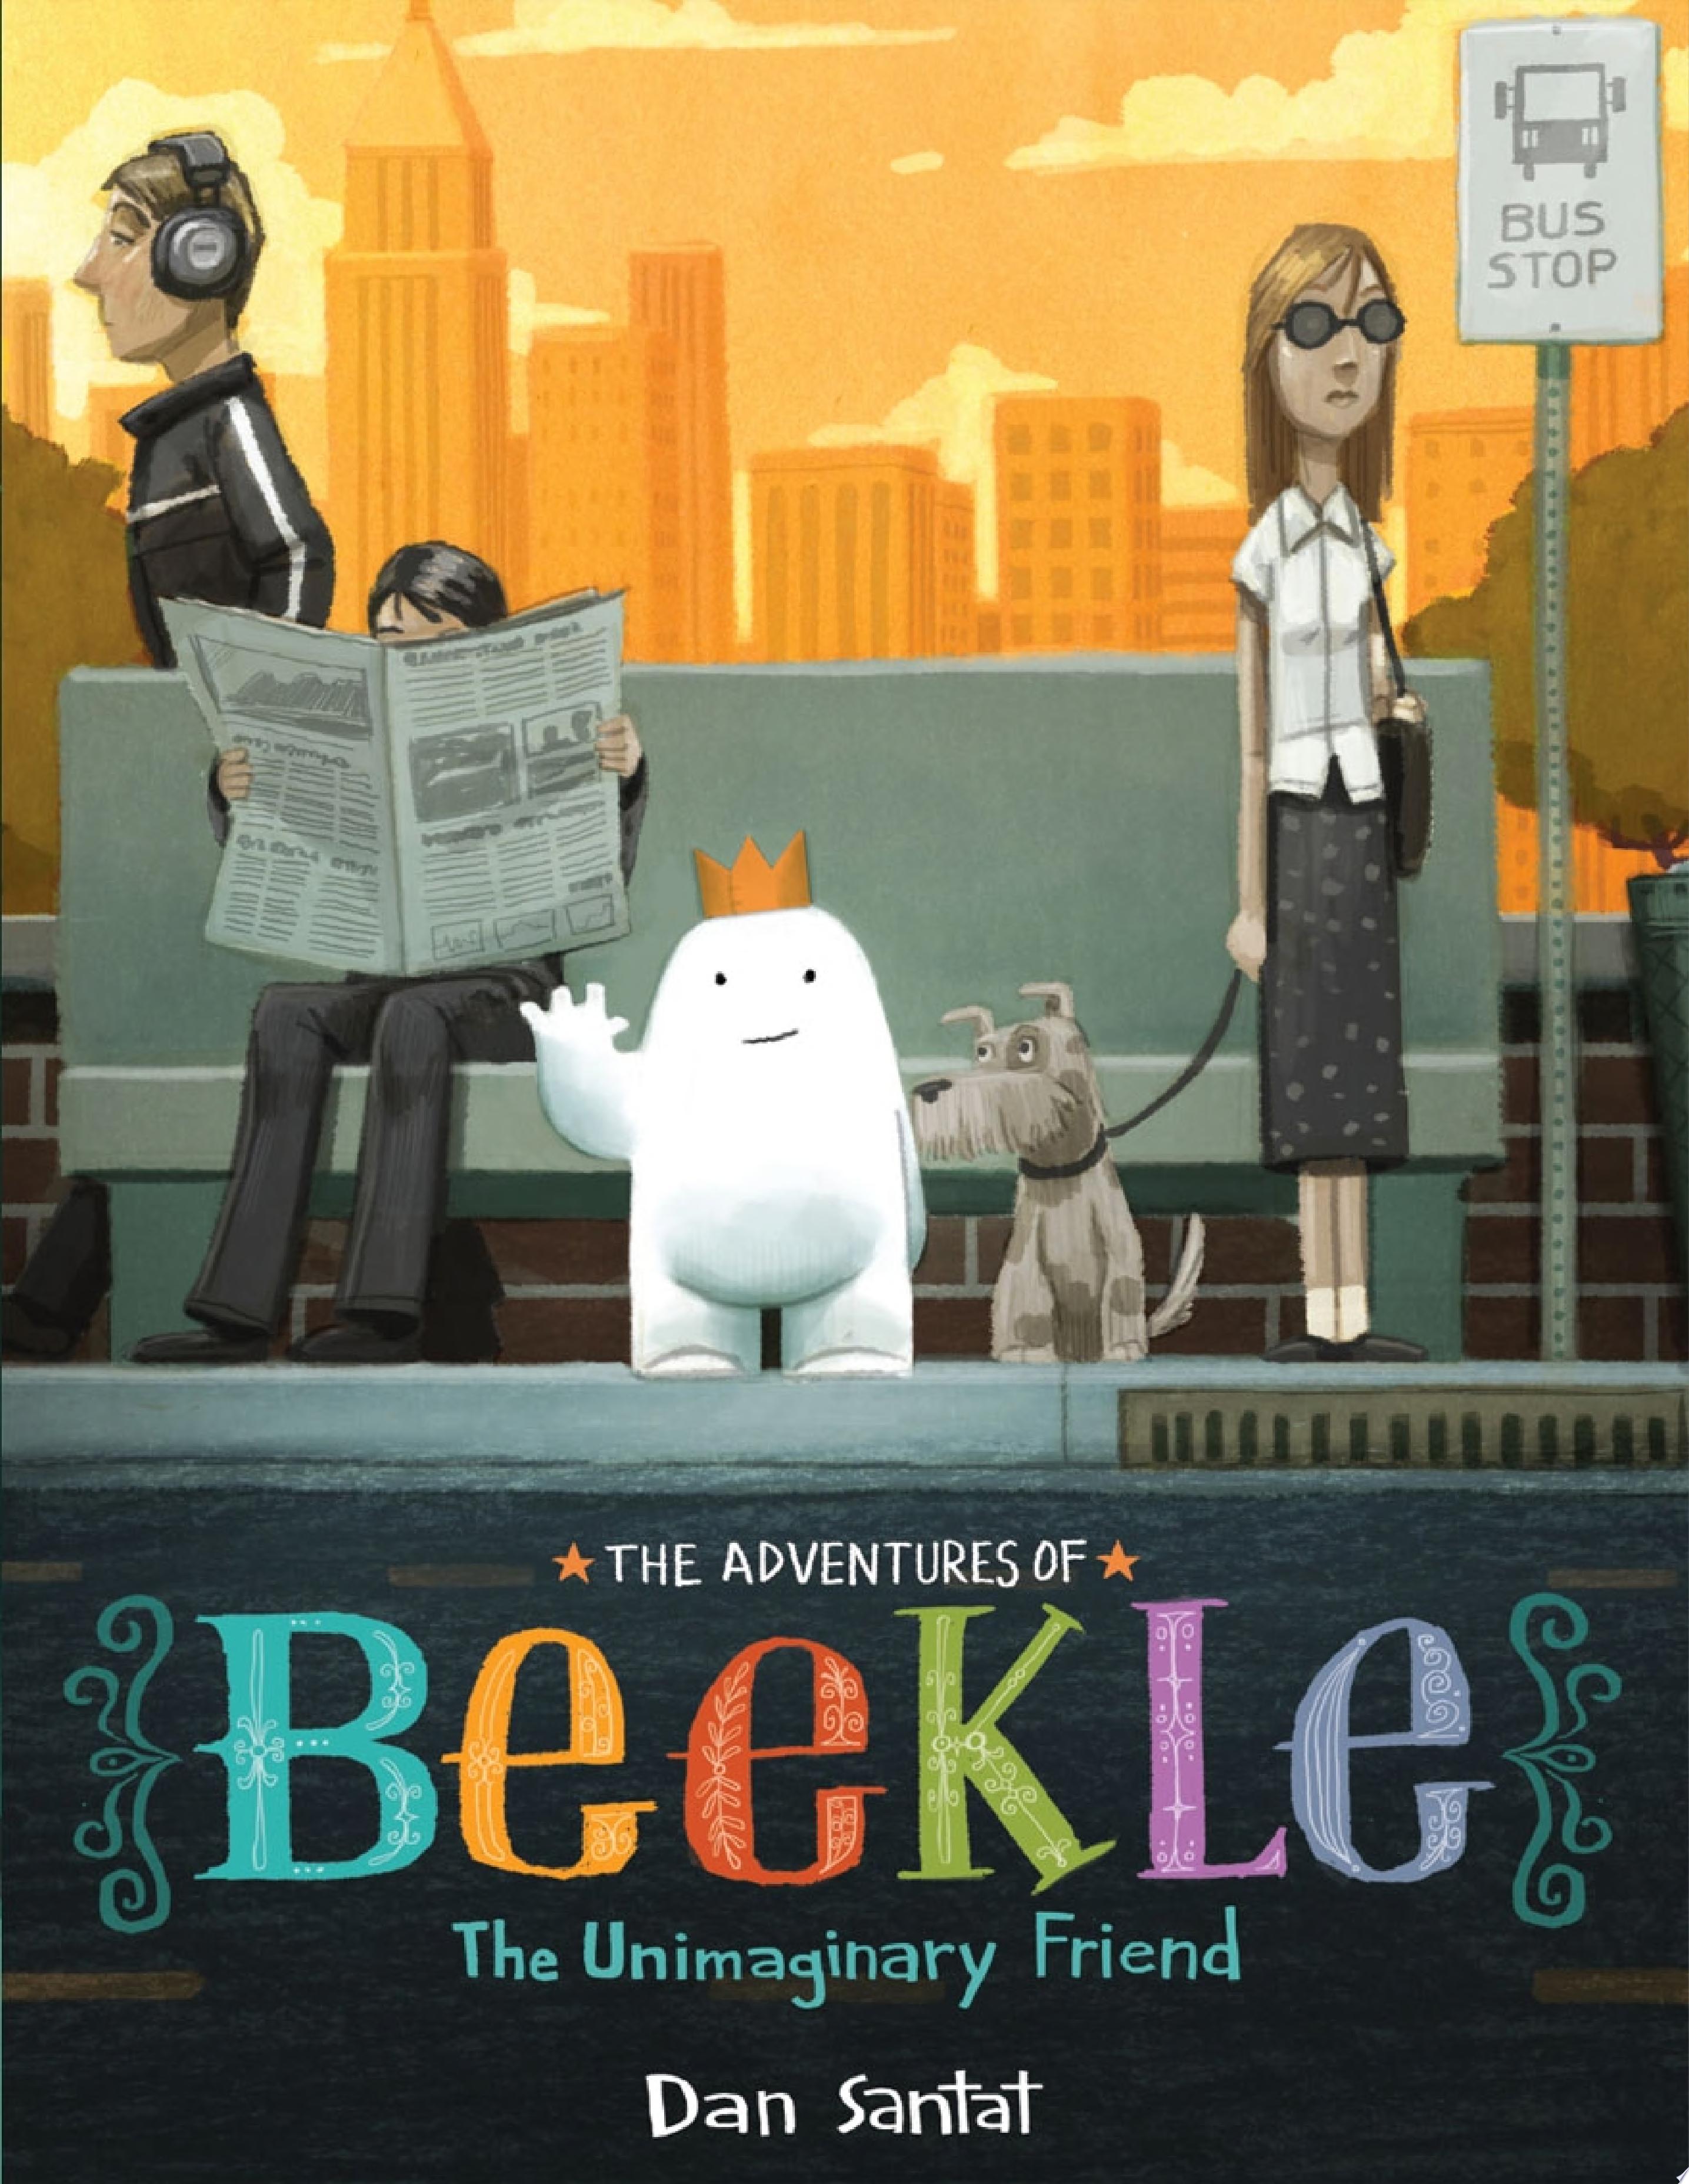 Image for "The Adventures of Beekle: The Unimaginary Friend"